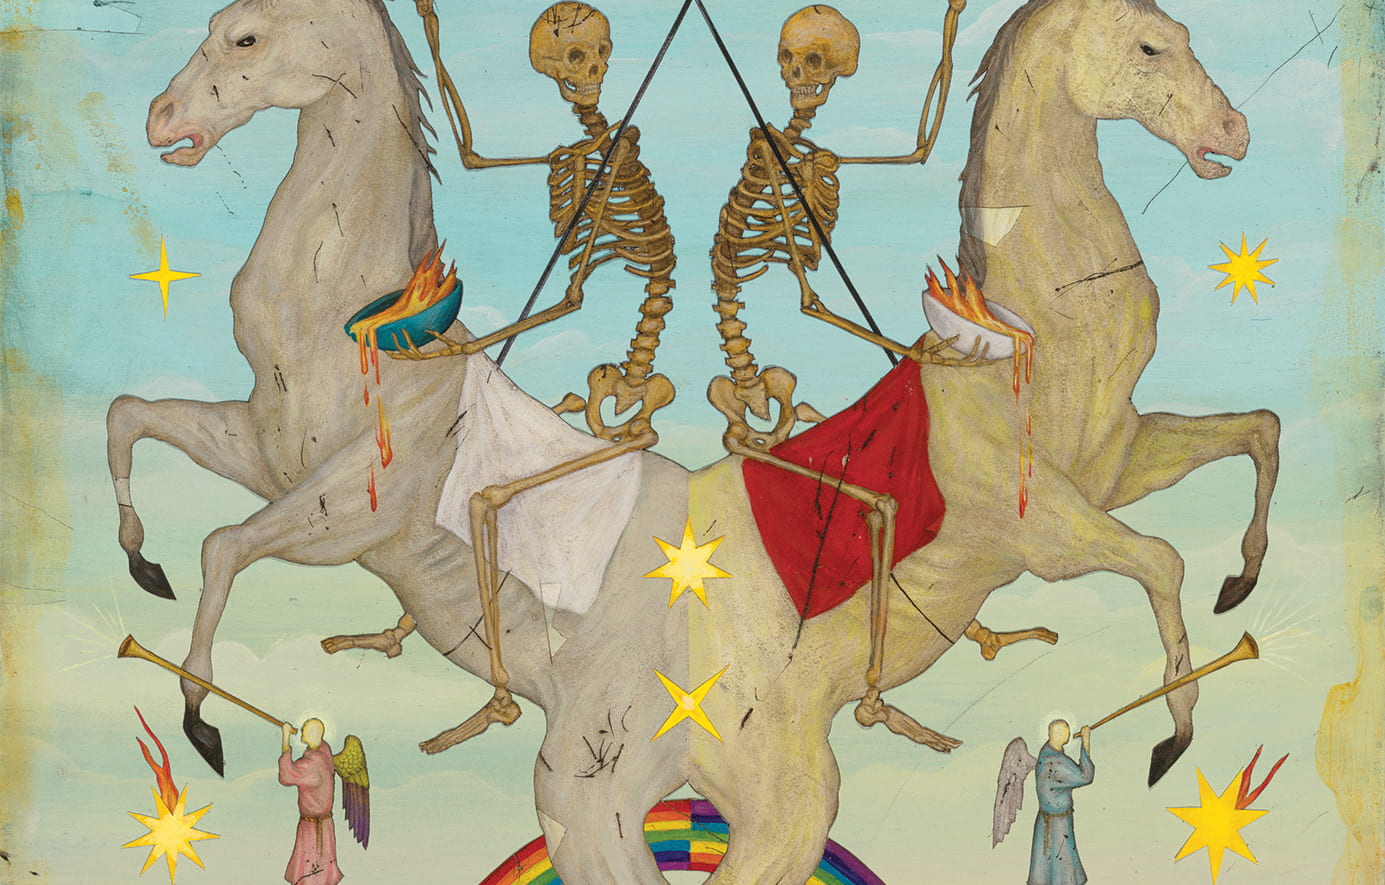 Illustration of with two skeletons riding pale horses, mirroring each other, surrounded by apocalyptic imagery